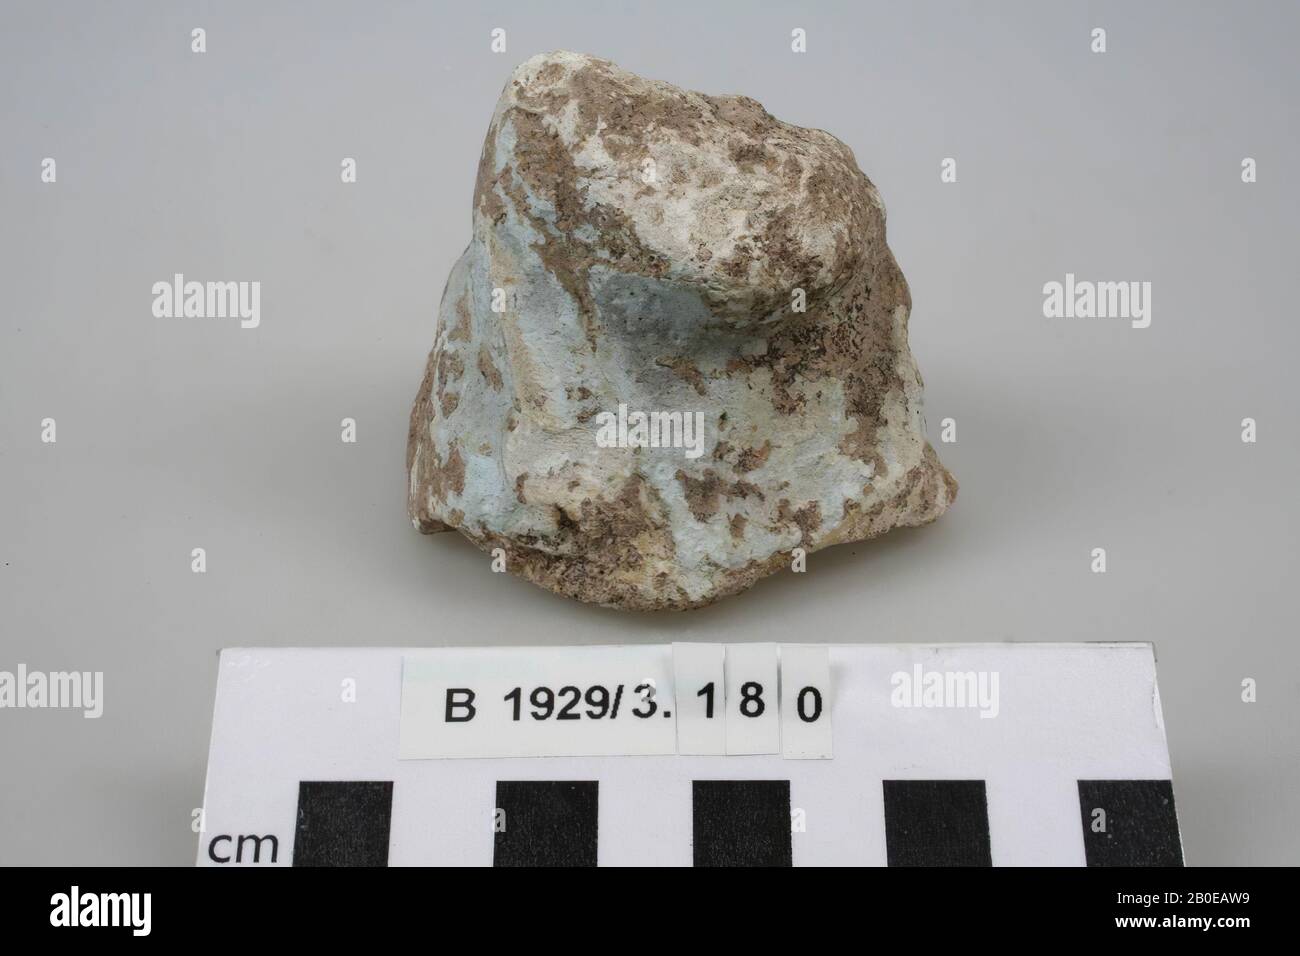 A fragment of a figurine (?), Very weathered and without recognizable shape., Figurine (?), Stone, limestone, faience (?), L 8 cm, W 7 cm, H 6.5 cm, Palestine Stock Photo